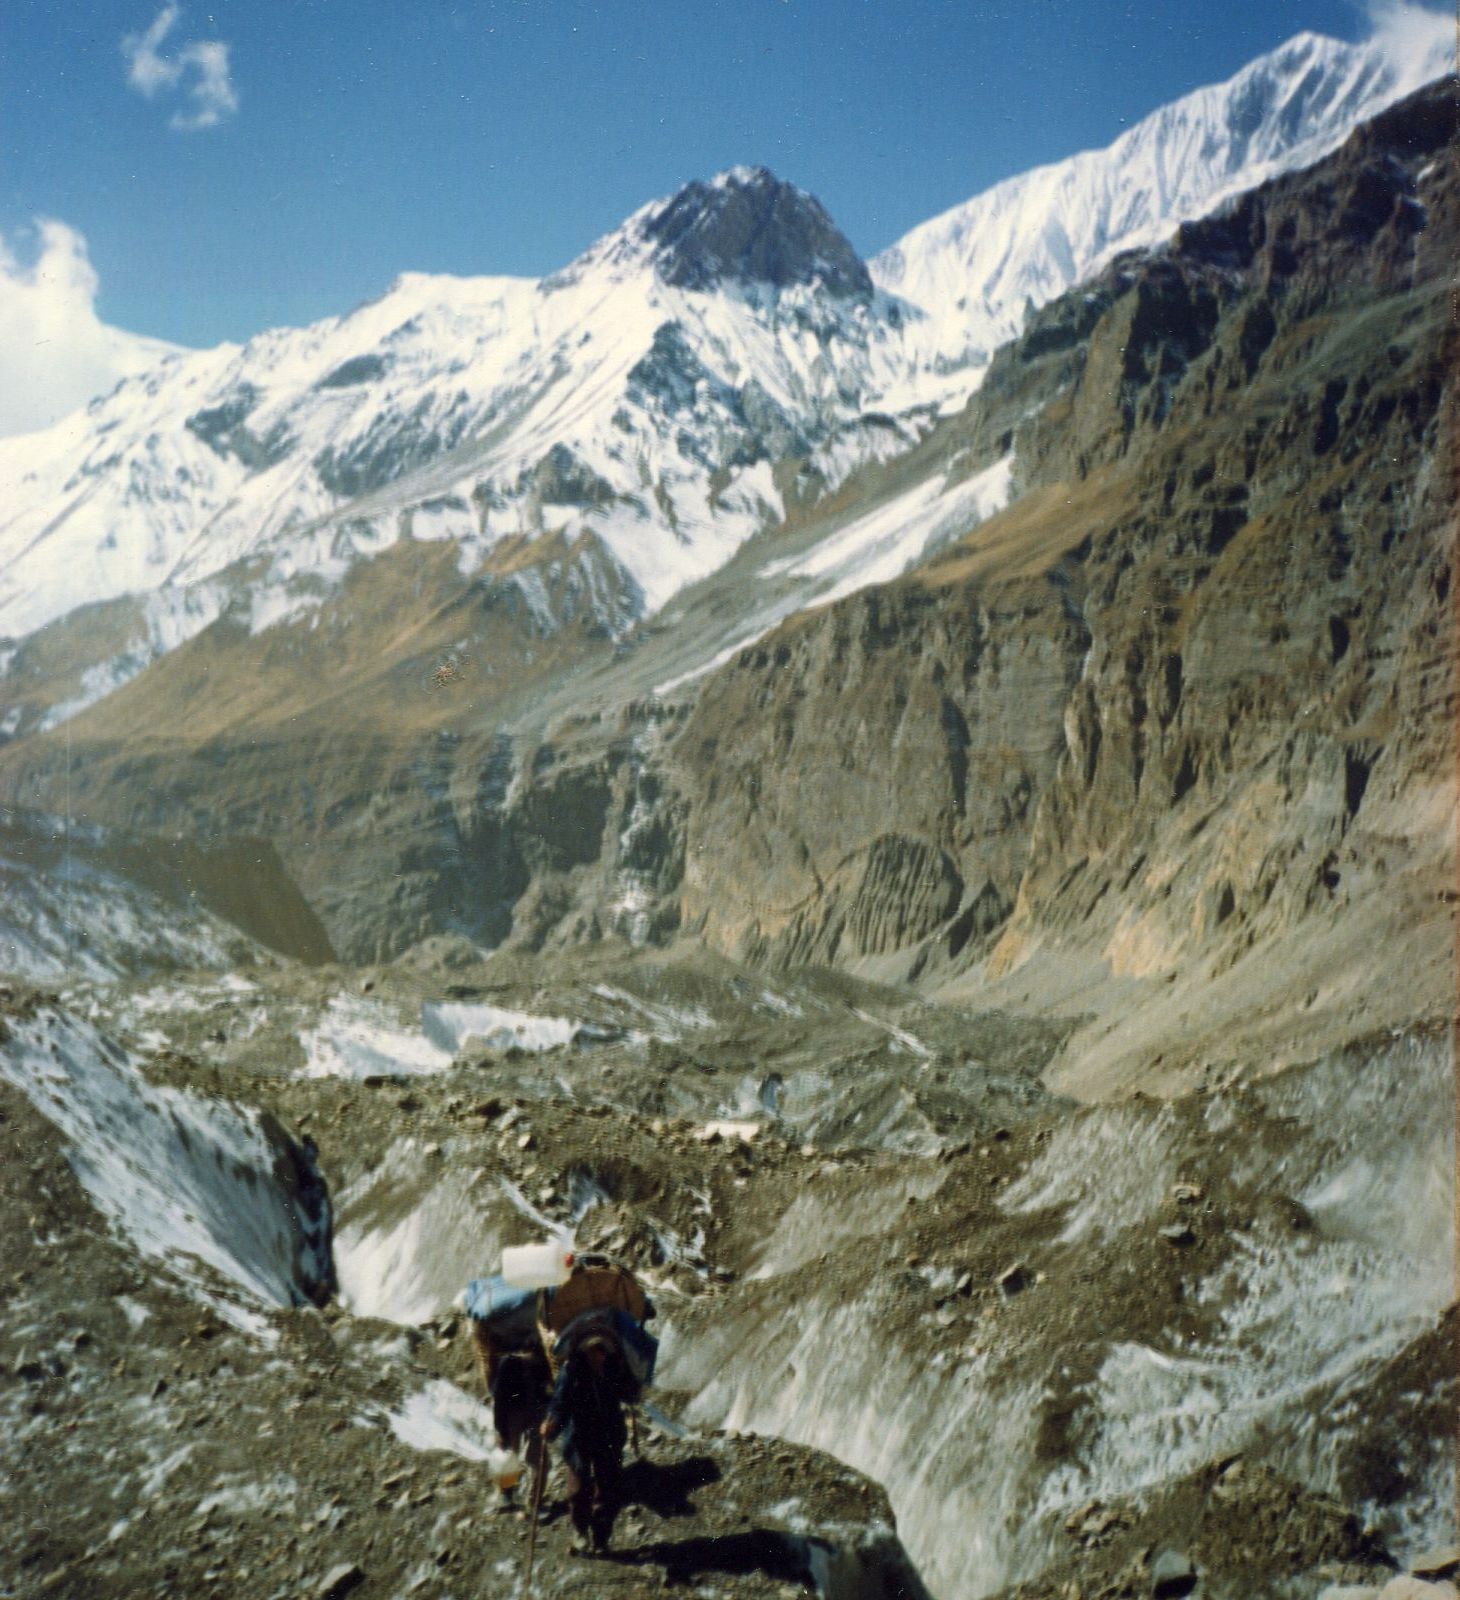 Ascent of Chonbarden Glacier on route to Dhaulagiri Base Camp